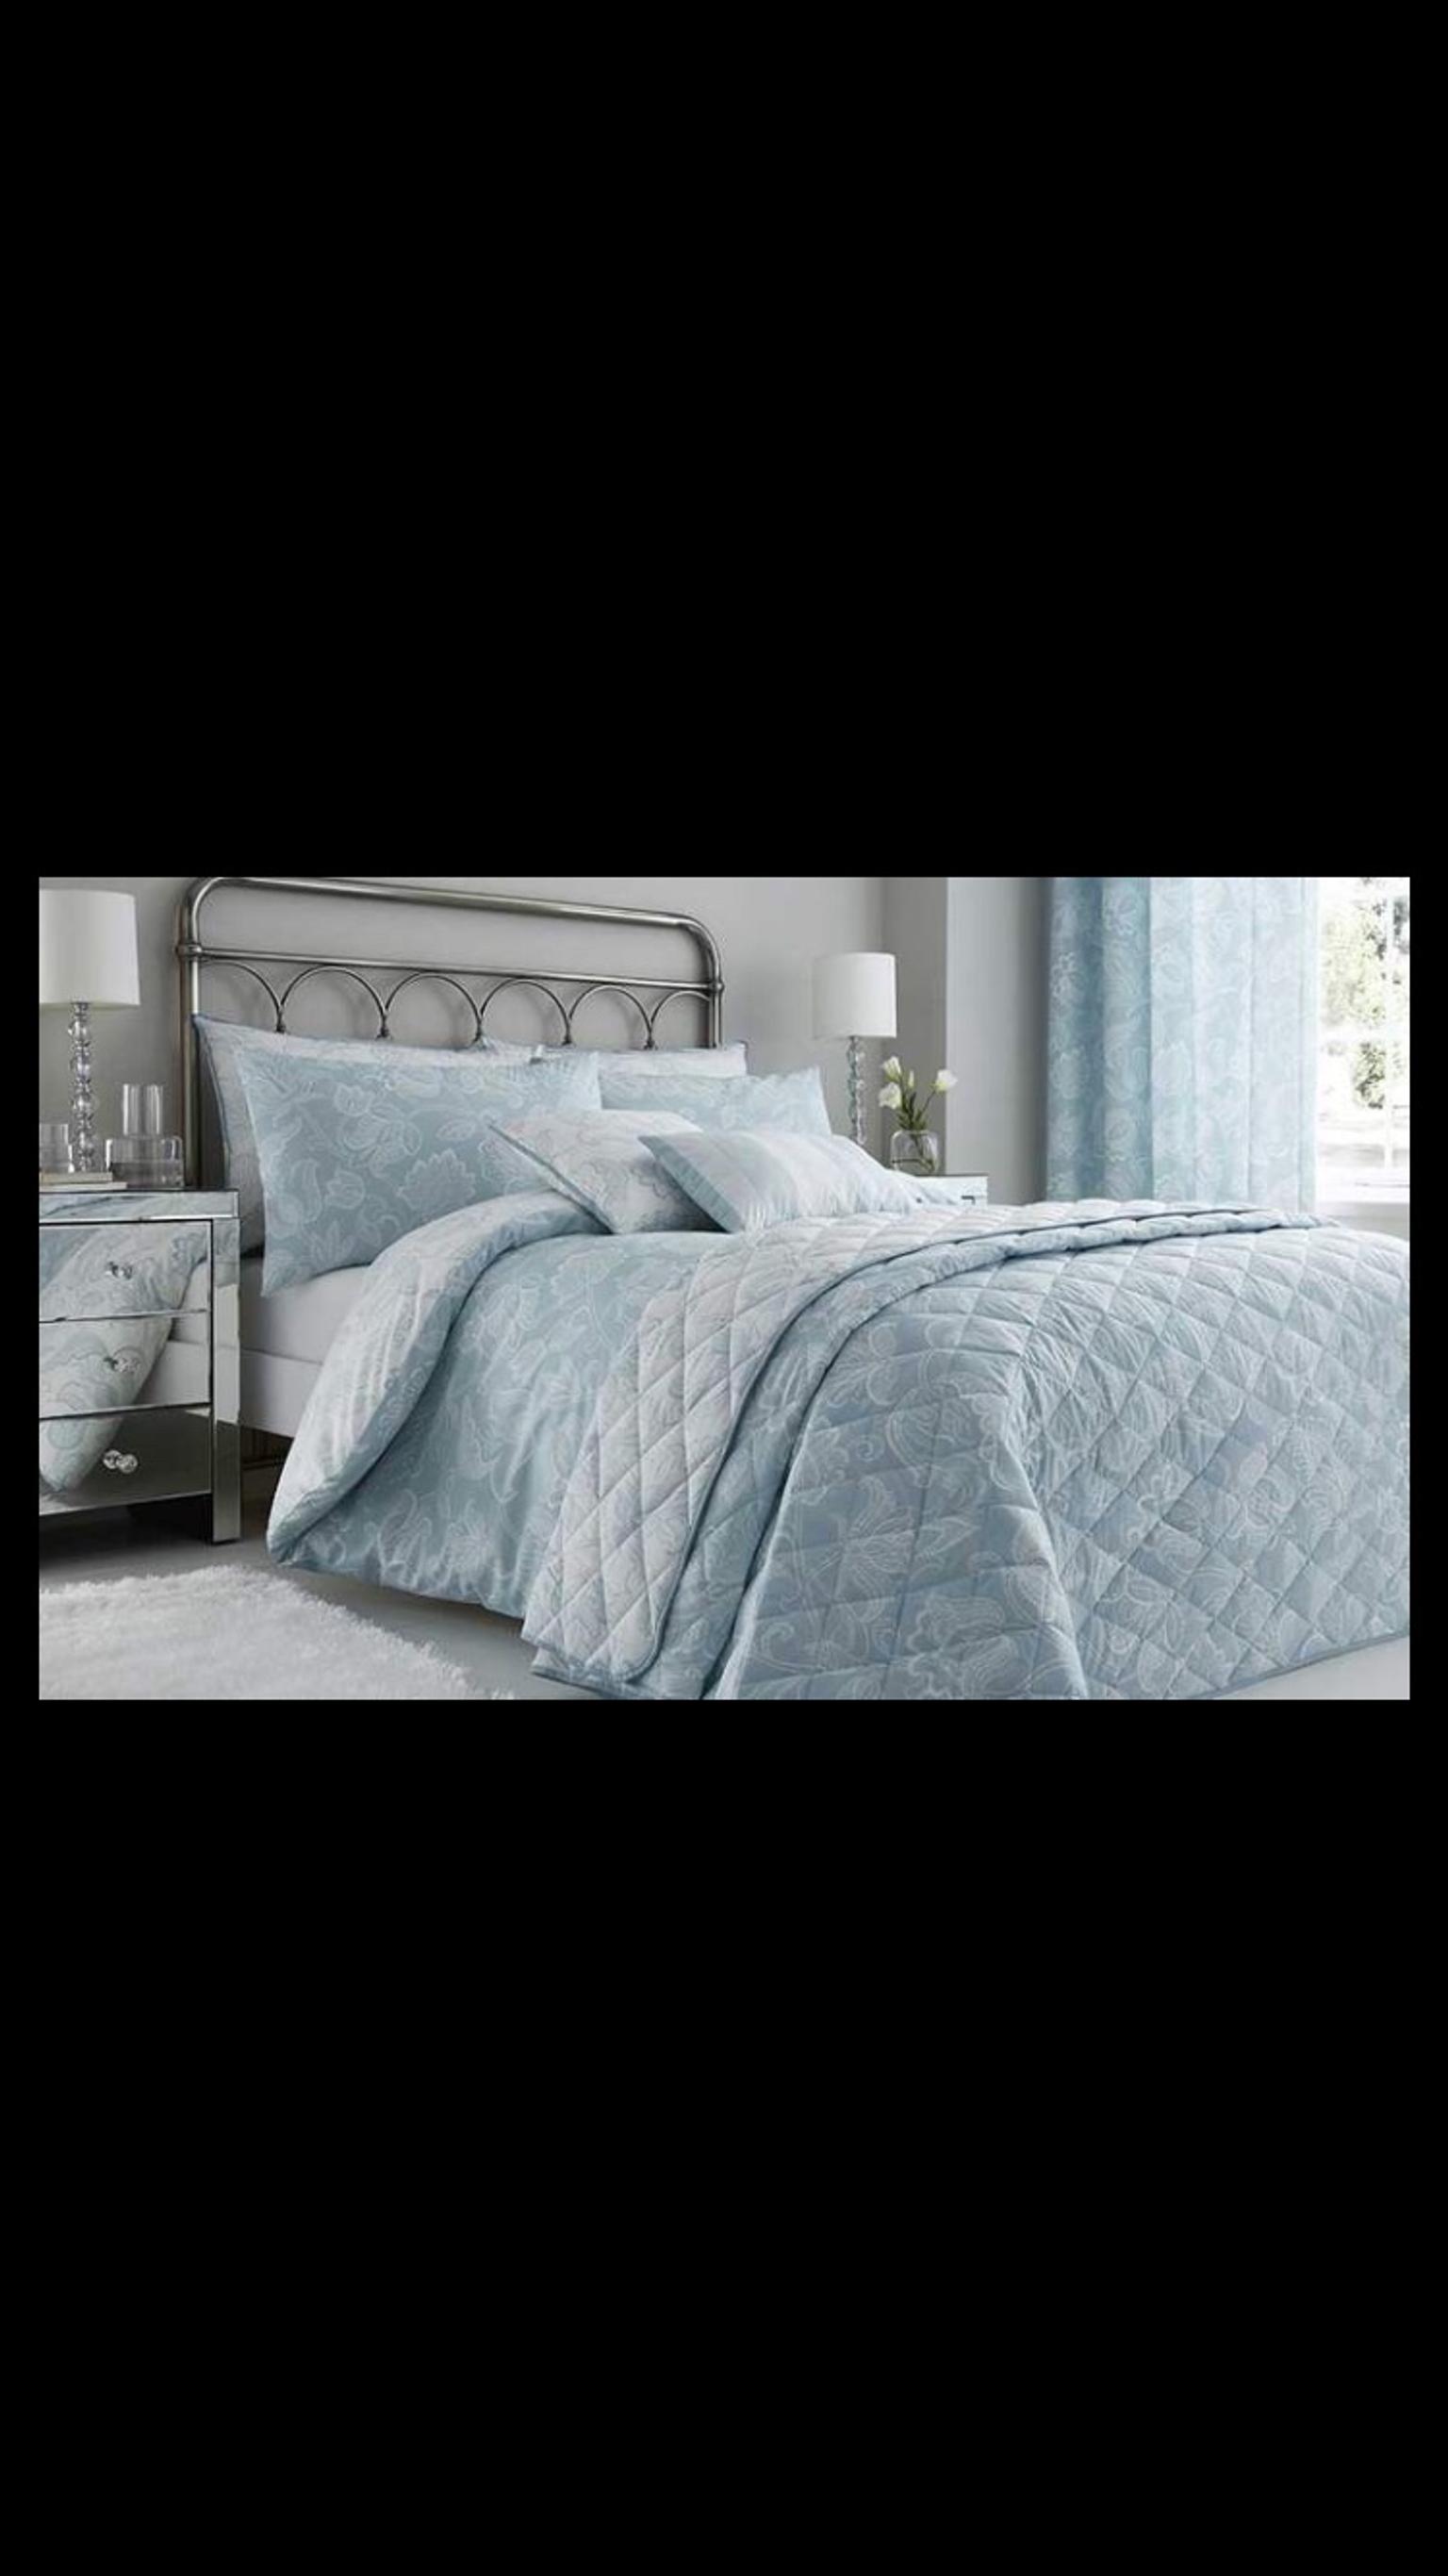 King Size Bedding Set Matching Curtains In Dy4 Sandwell For